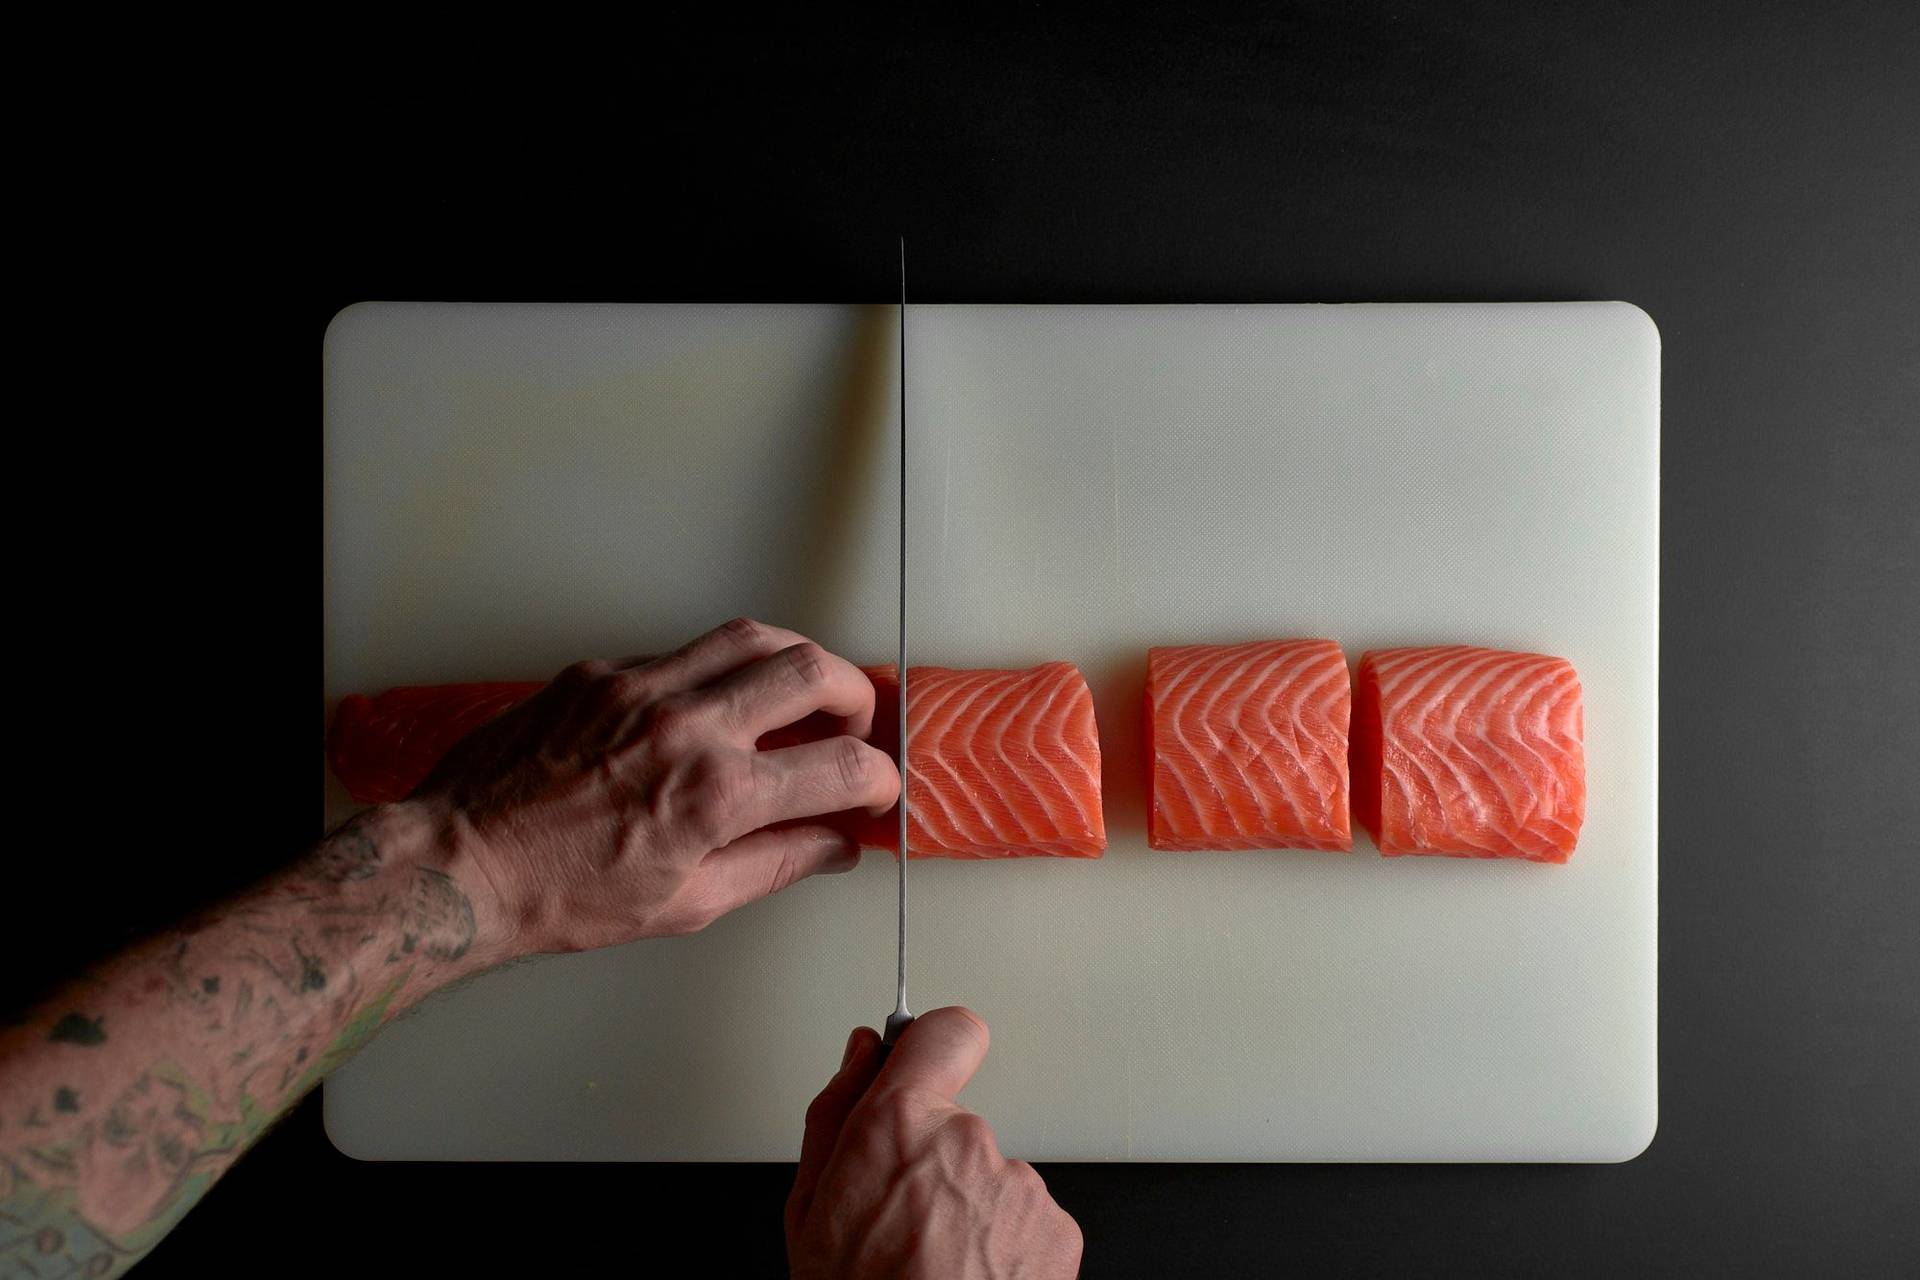 hands portioning salmon filet on a white board with black background